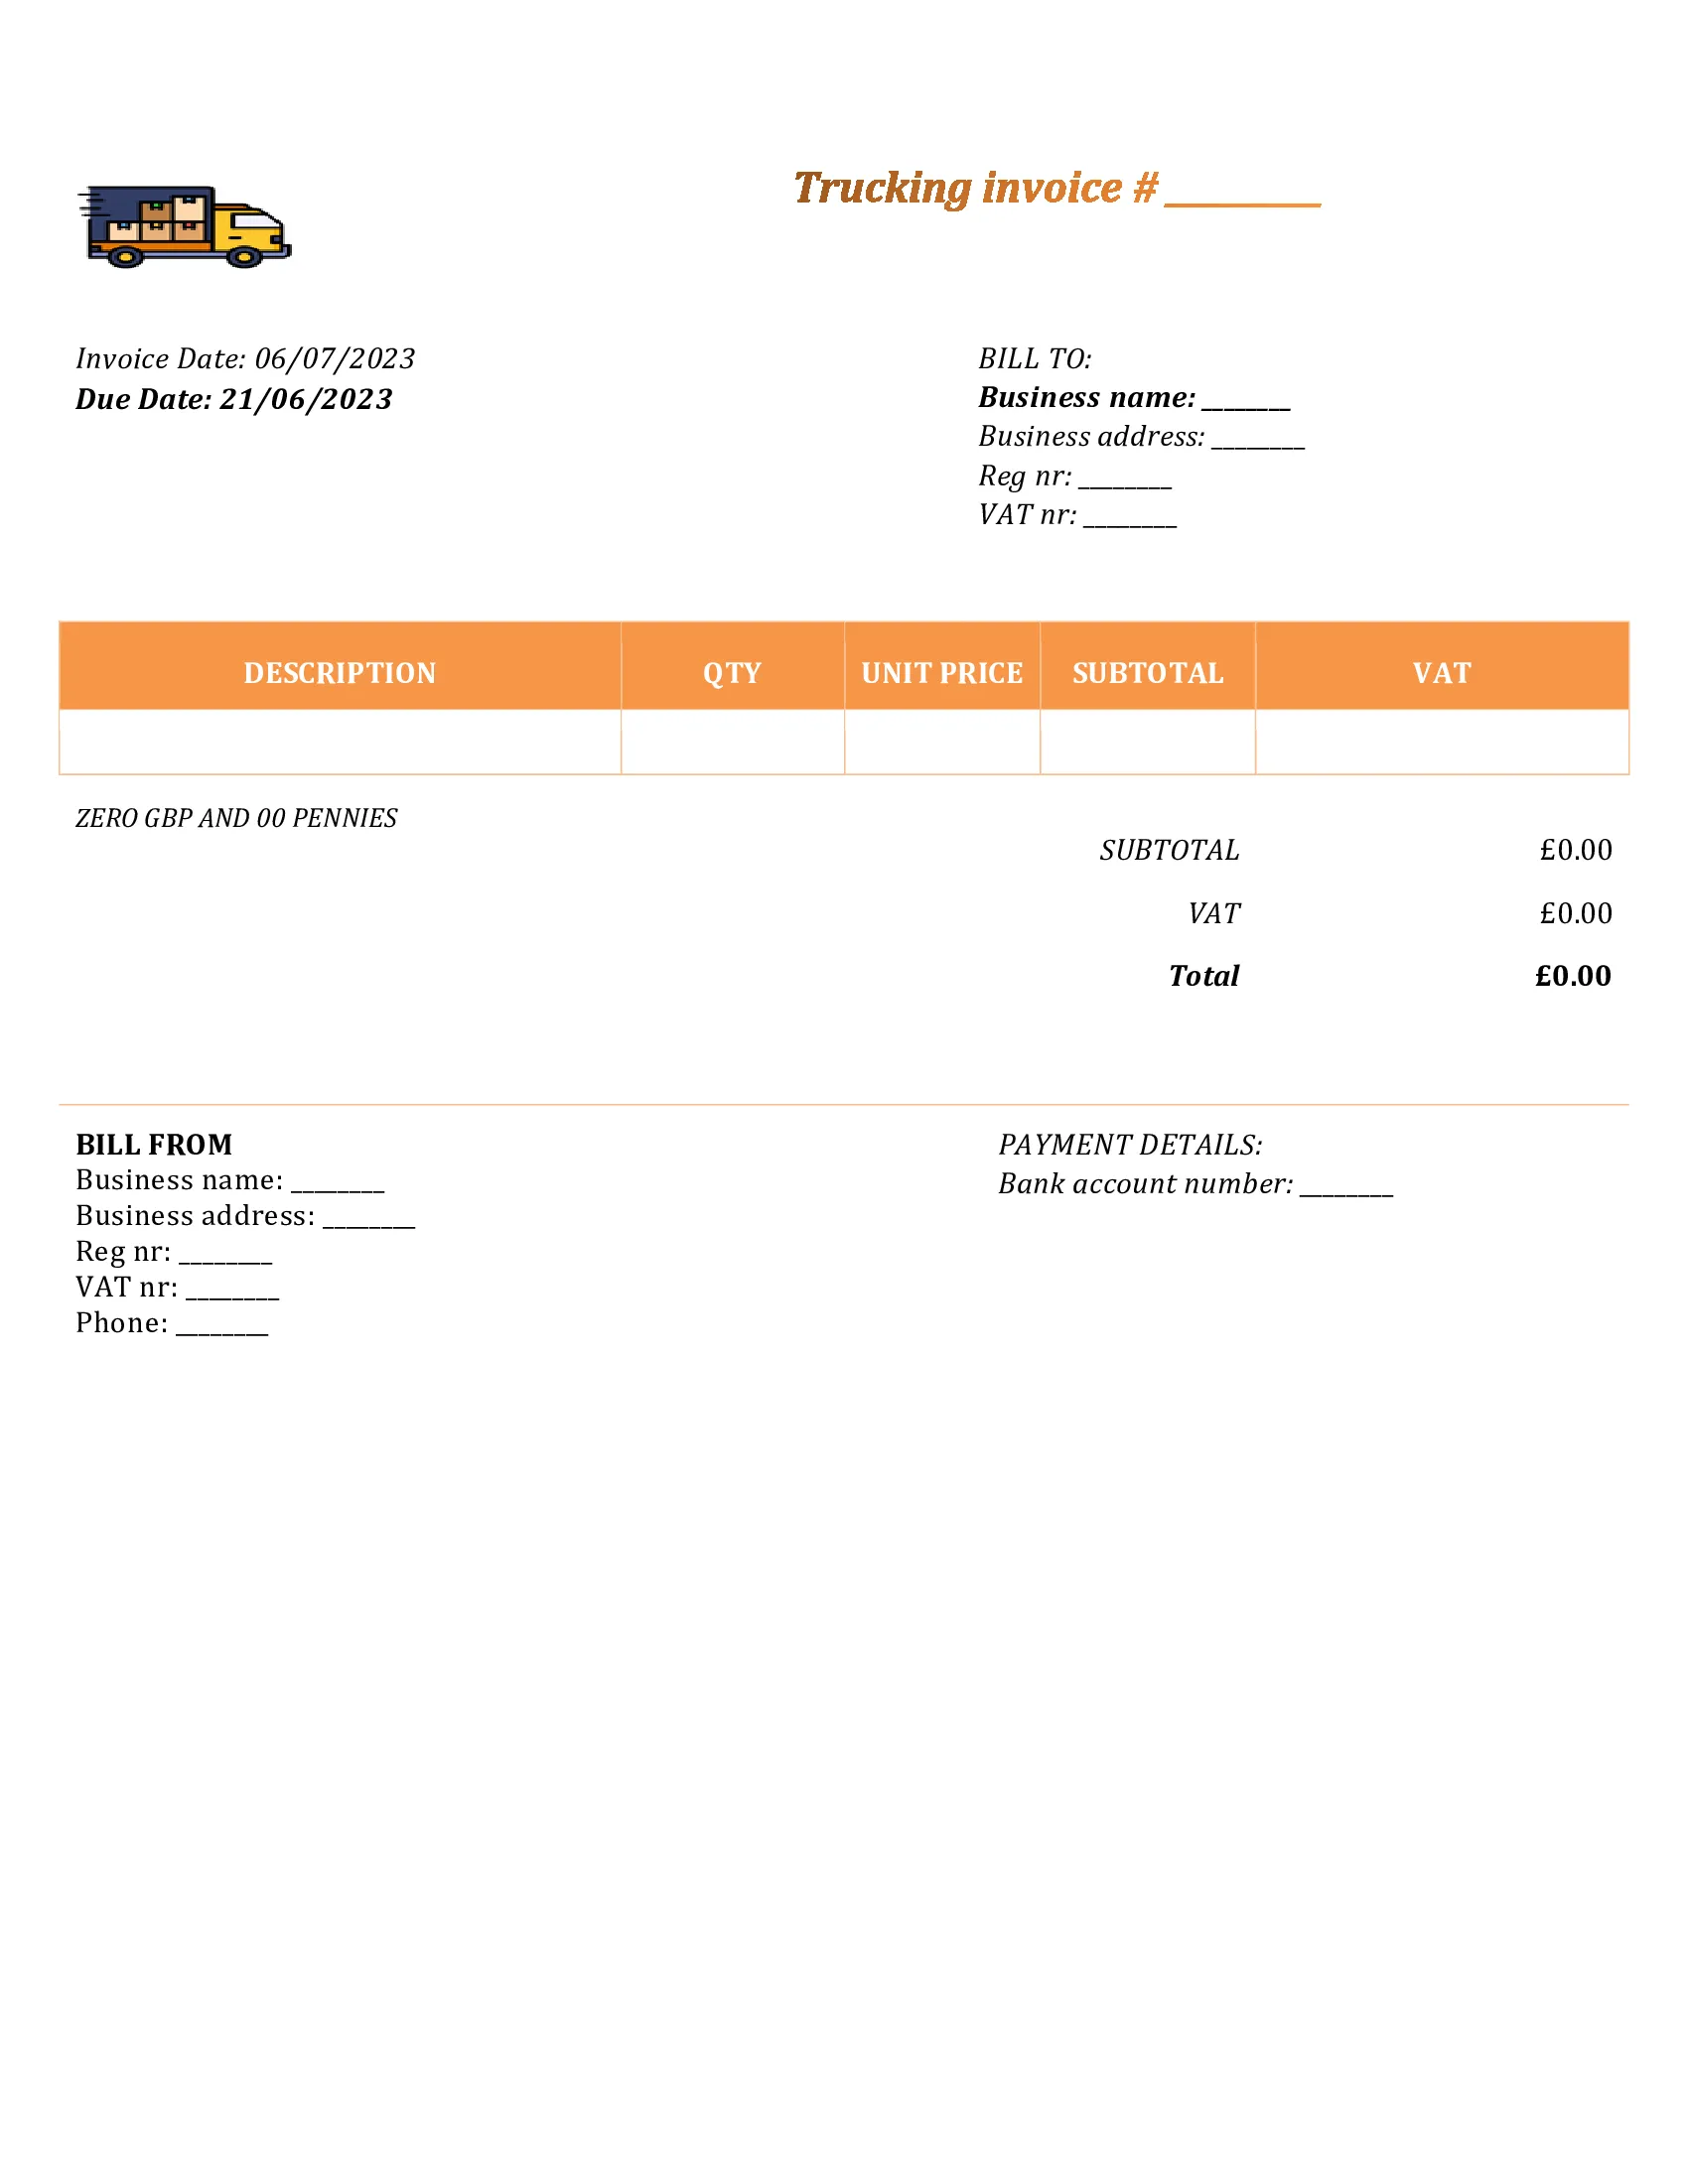 personal trucking invoice template UK Word / Google docs